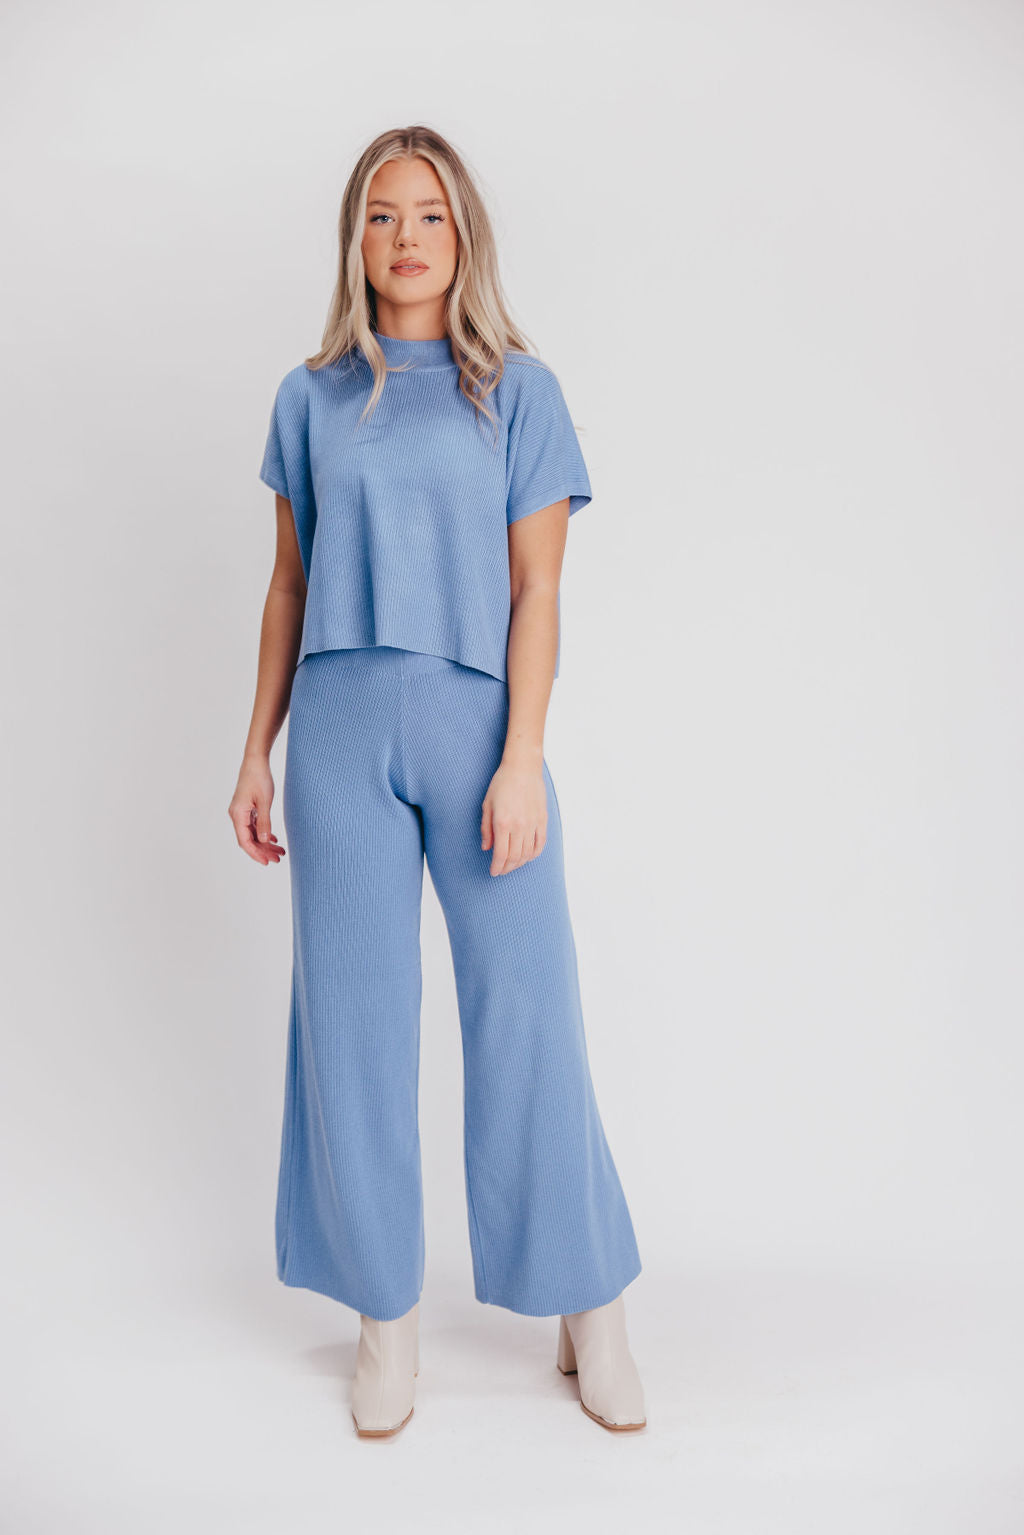 Tripp Knit Top and Pant Set in Blue